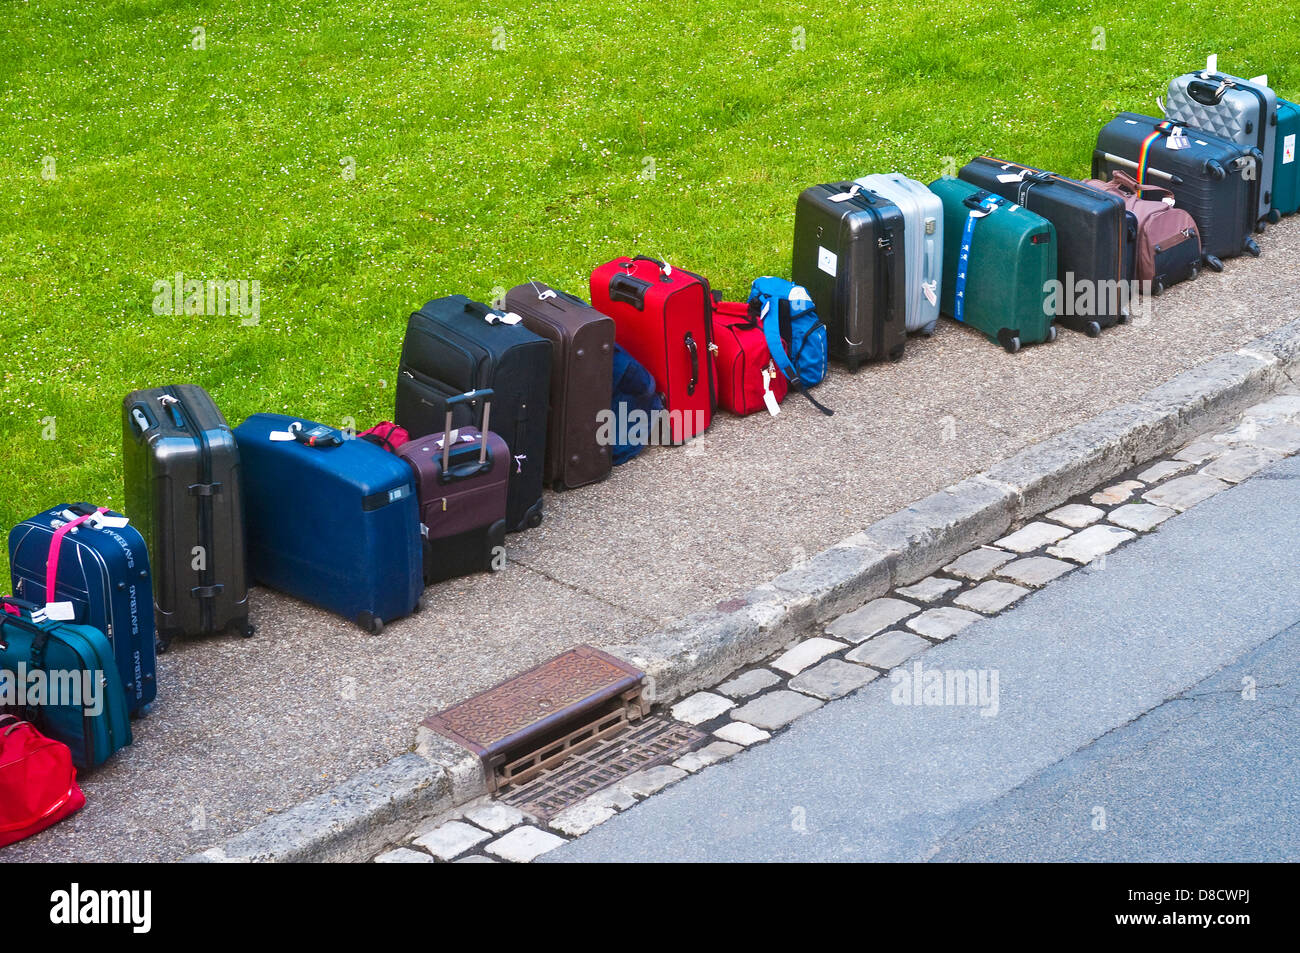 Long line of tourist's suitcases on pavement - France. Stock Photo